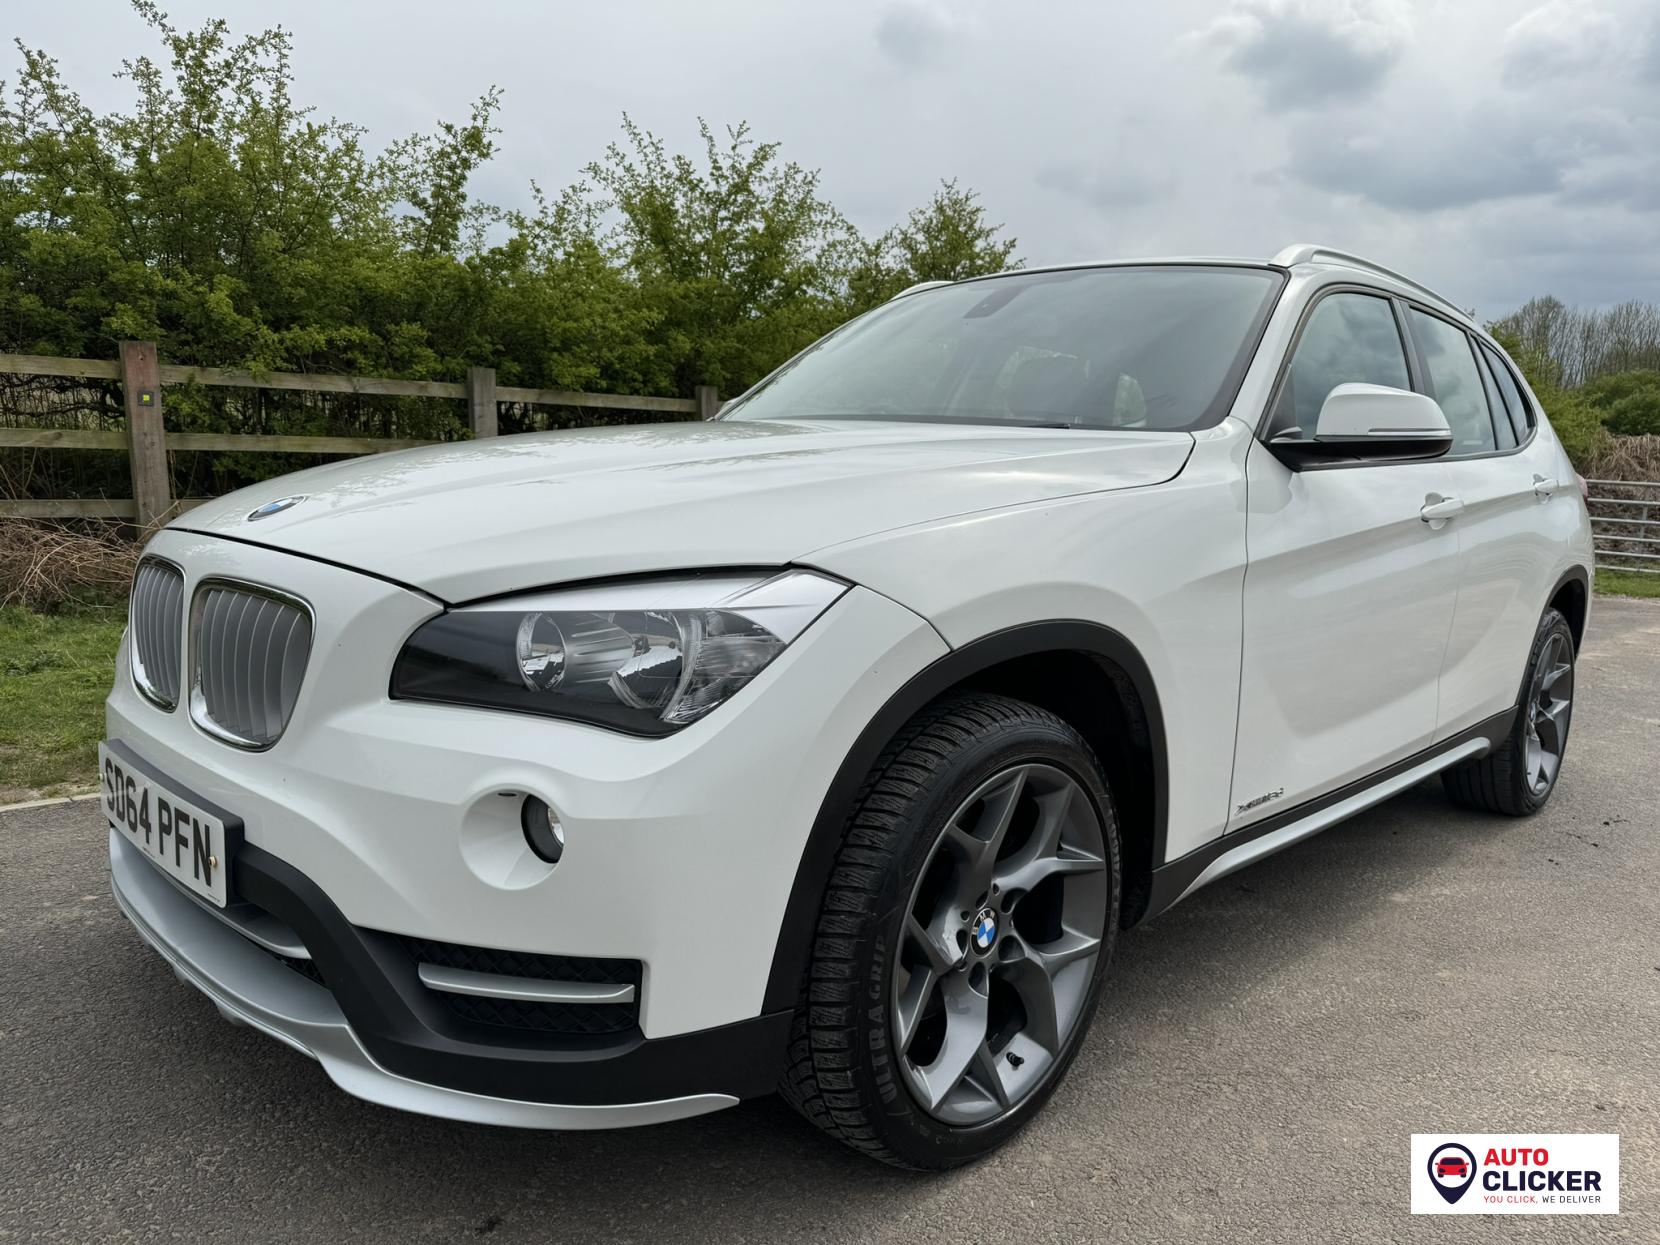 BMW X1 2.0 18d xLine SUV 5dr Diesel Manual xDrive Euro 5 (s/s) (143 ps)